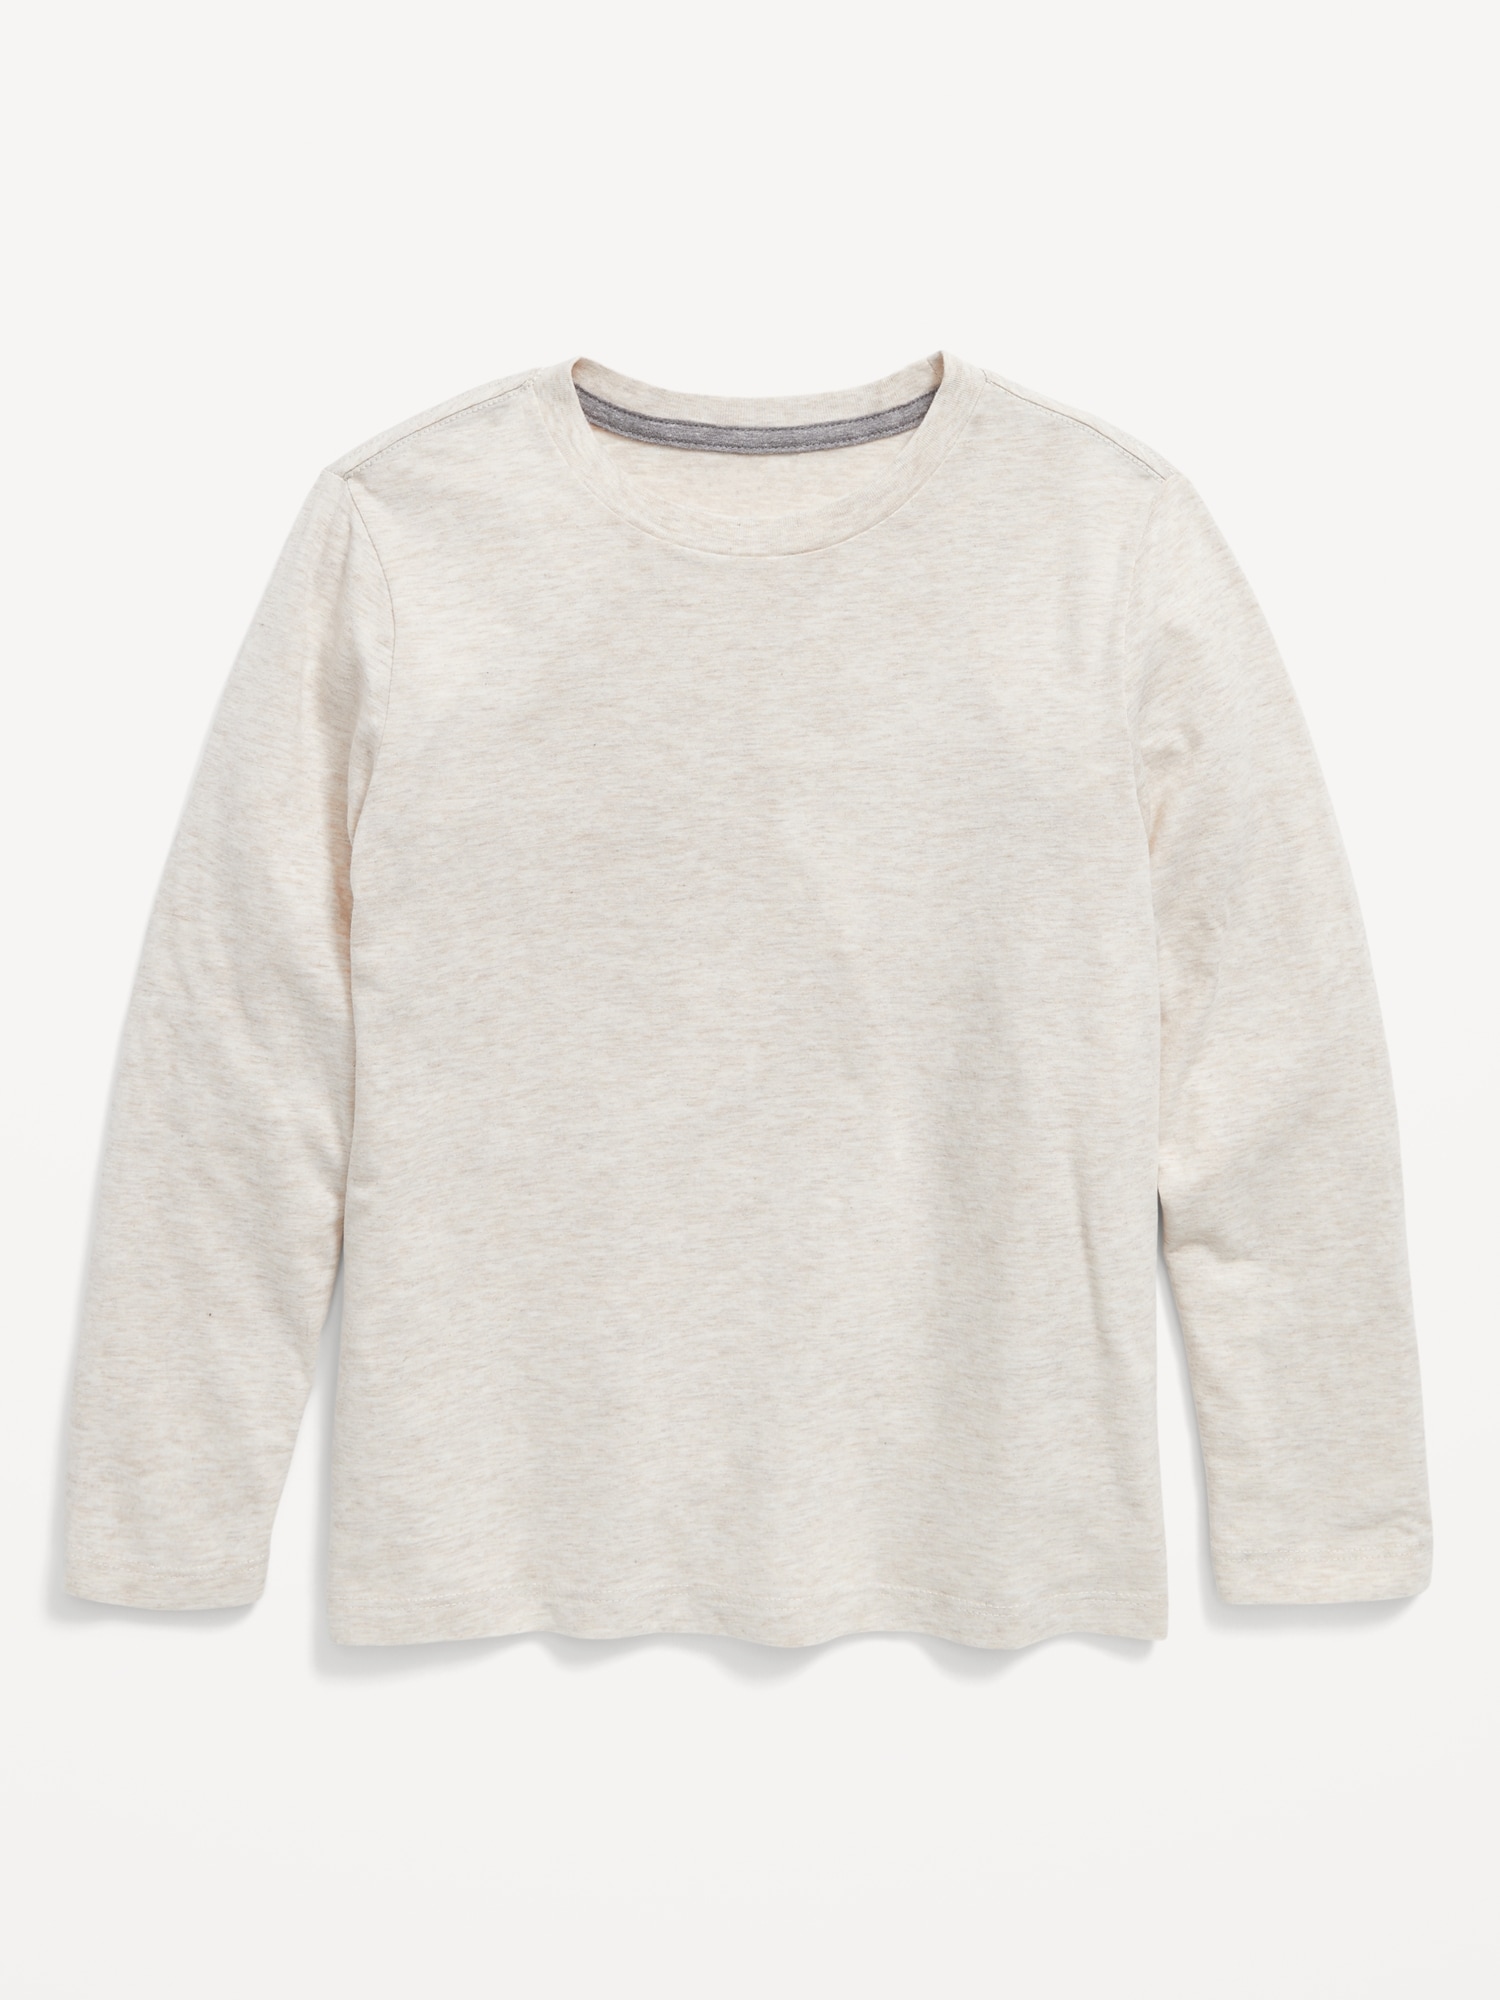 Softest Long-Sleeve Solid T-Shirt for Boys | Old Navy